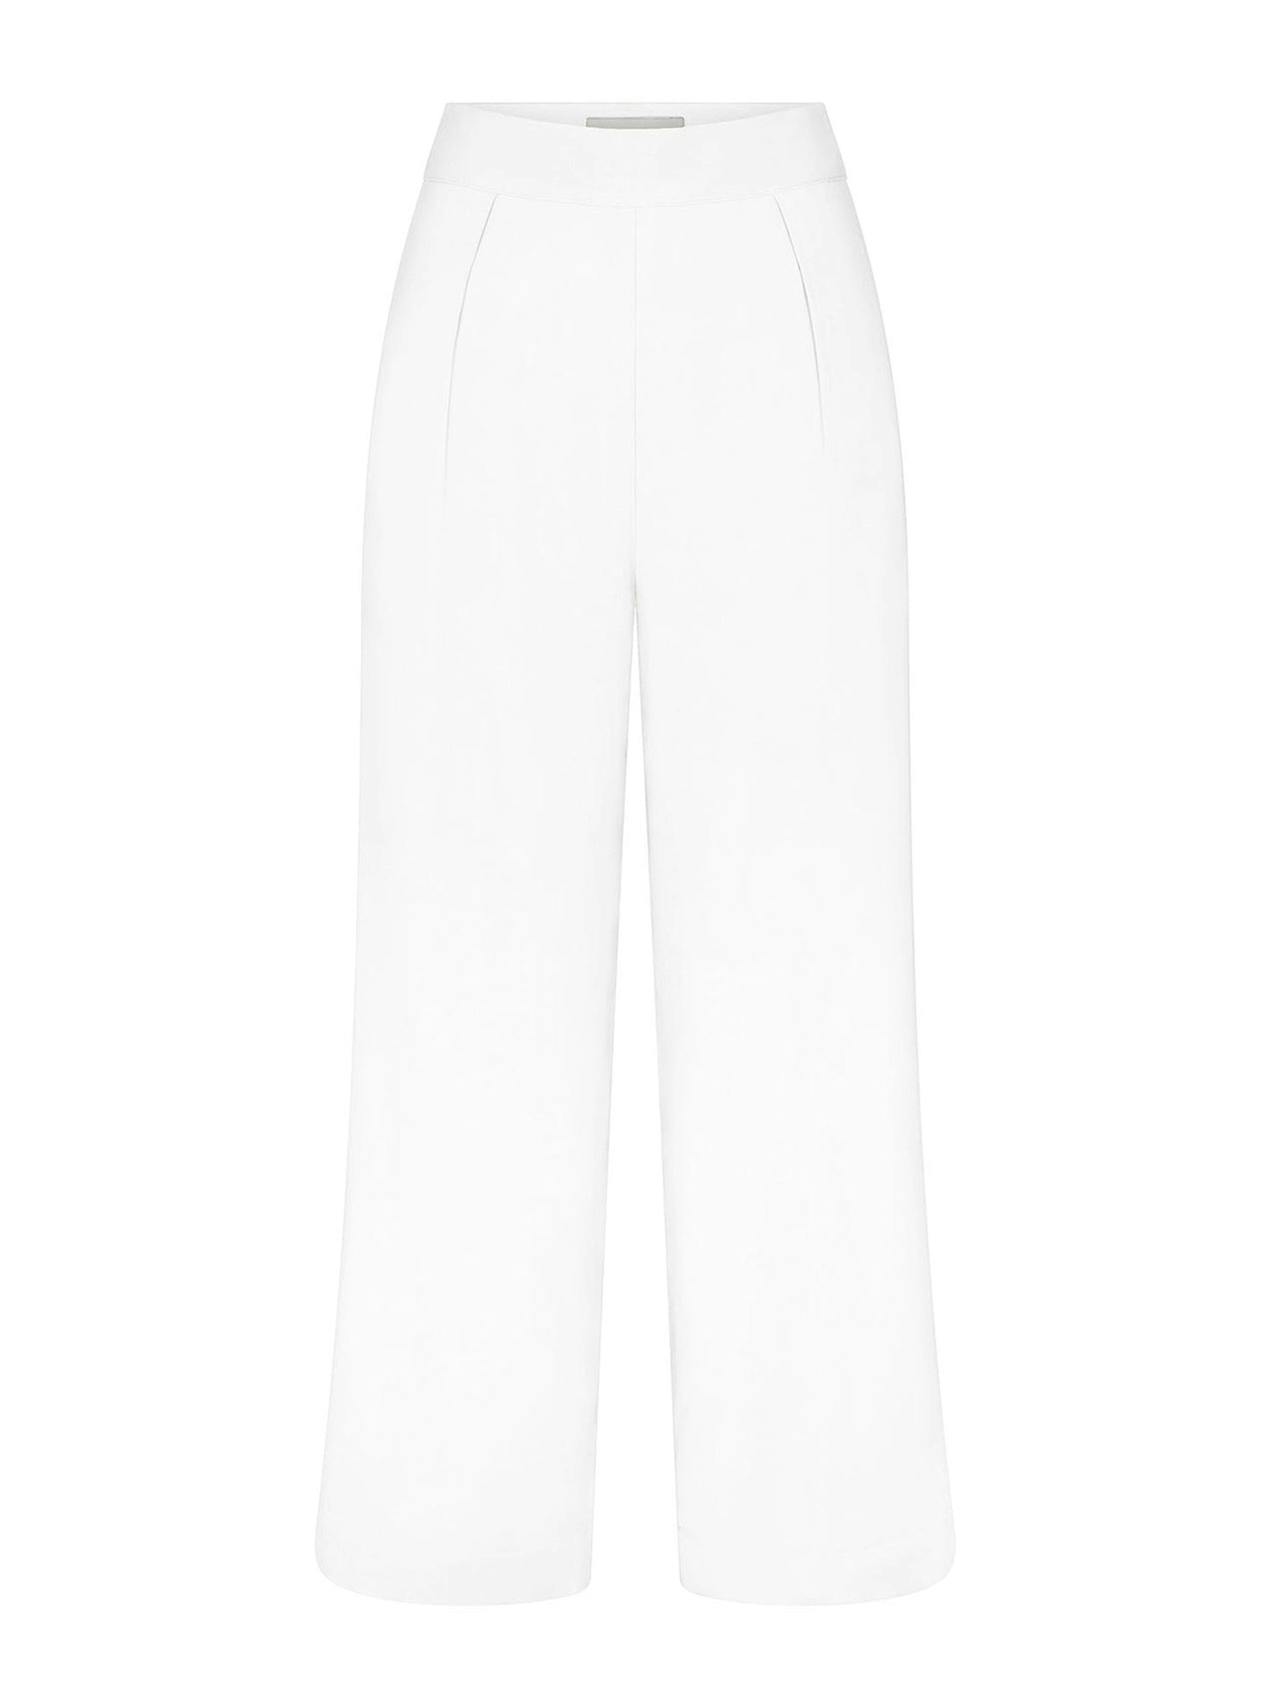 Wide leg pant in stretch twill